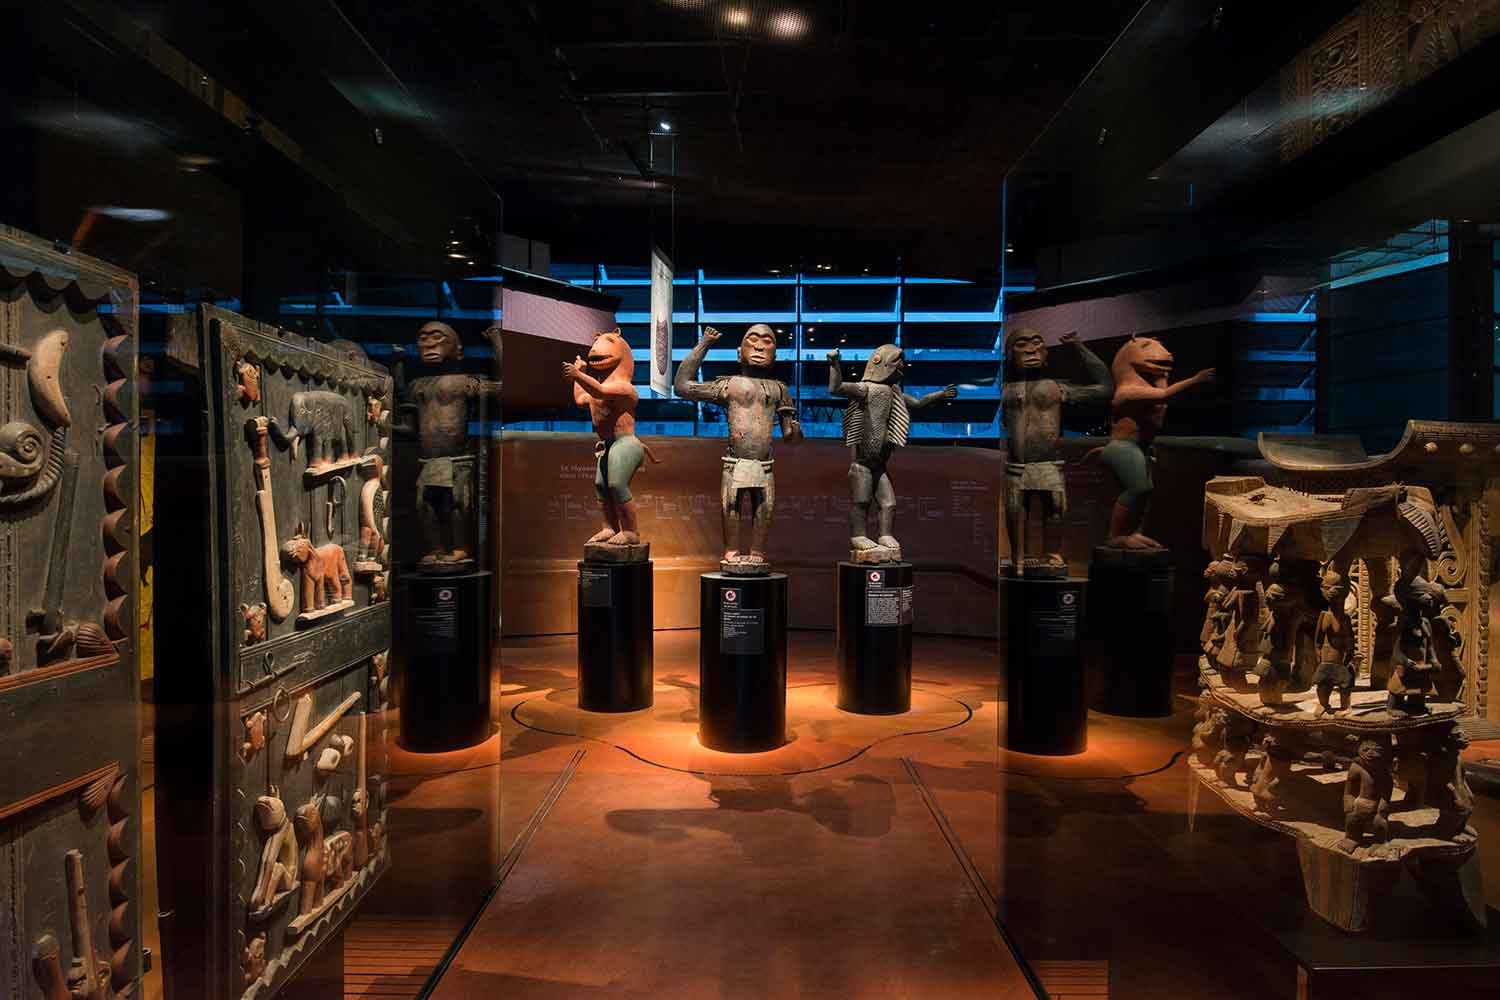 3 large carved wooden African-looking statues displayed on pedestals in a dark room